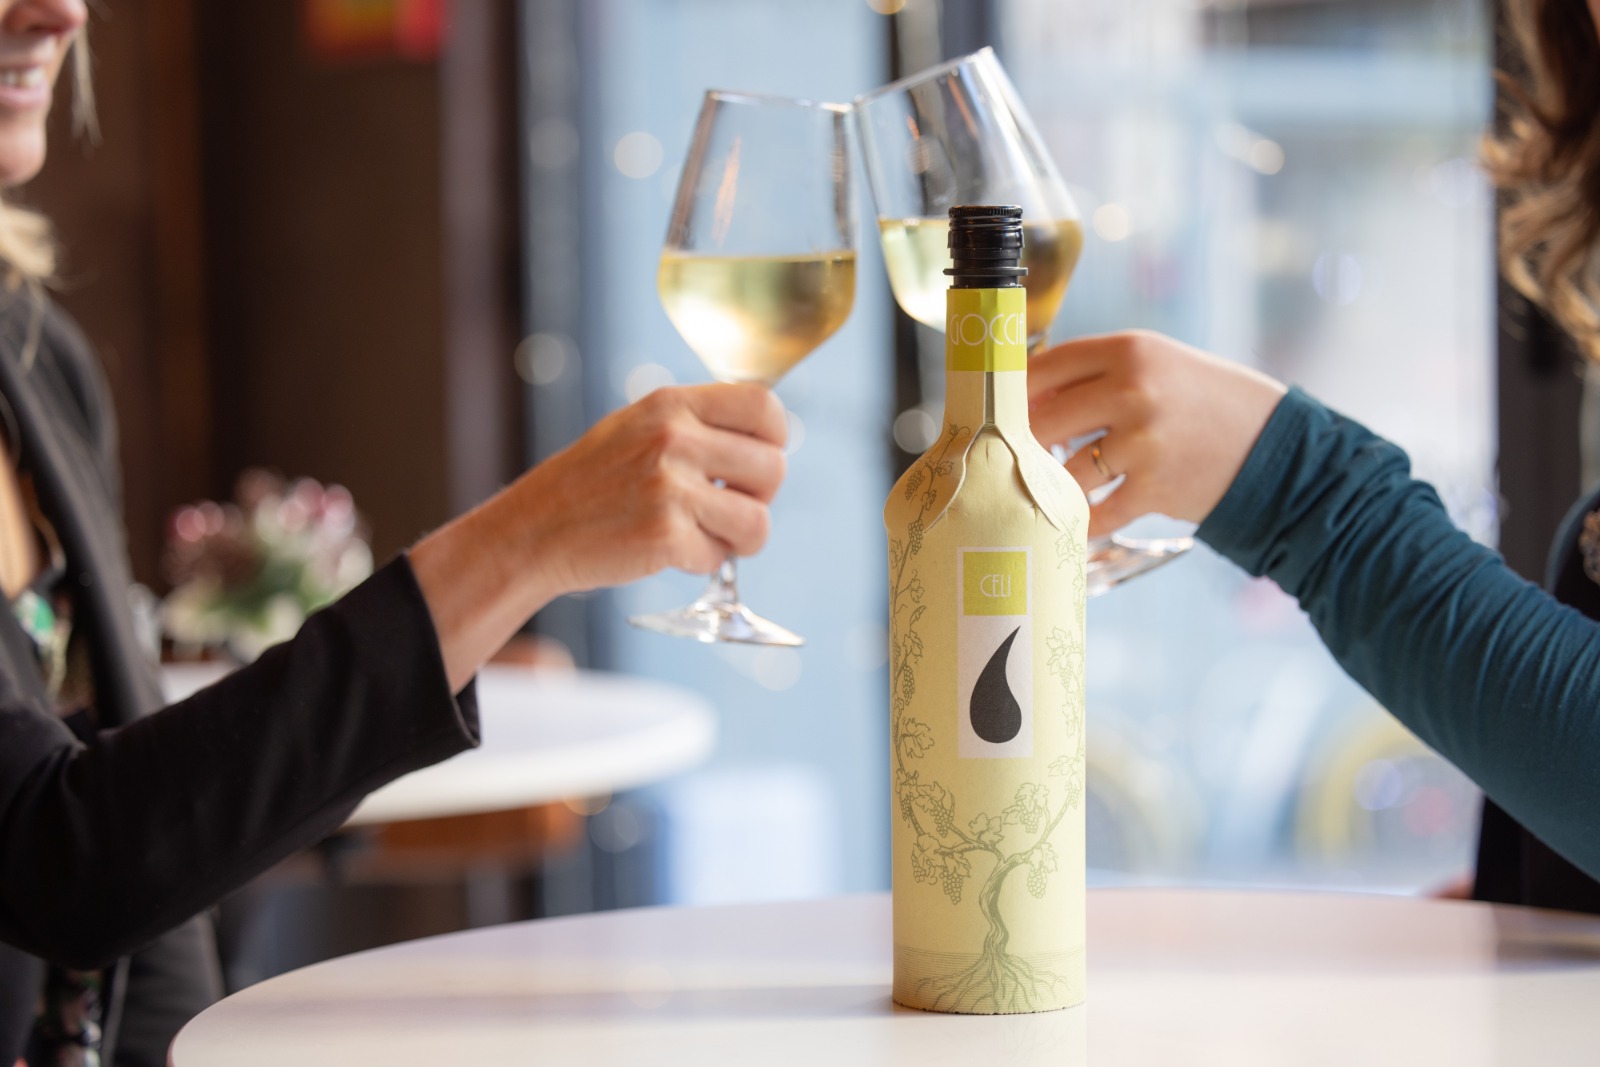 Cheers! Two thirds of wine drinkers would buy wine in a paper bottle as Frugalpac ramps up production to meet global demand